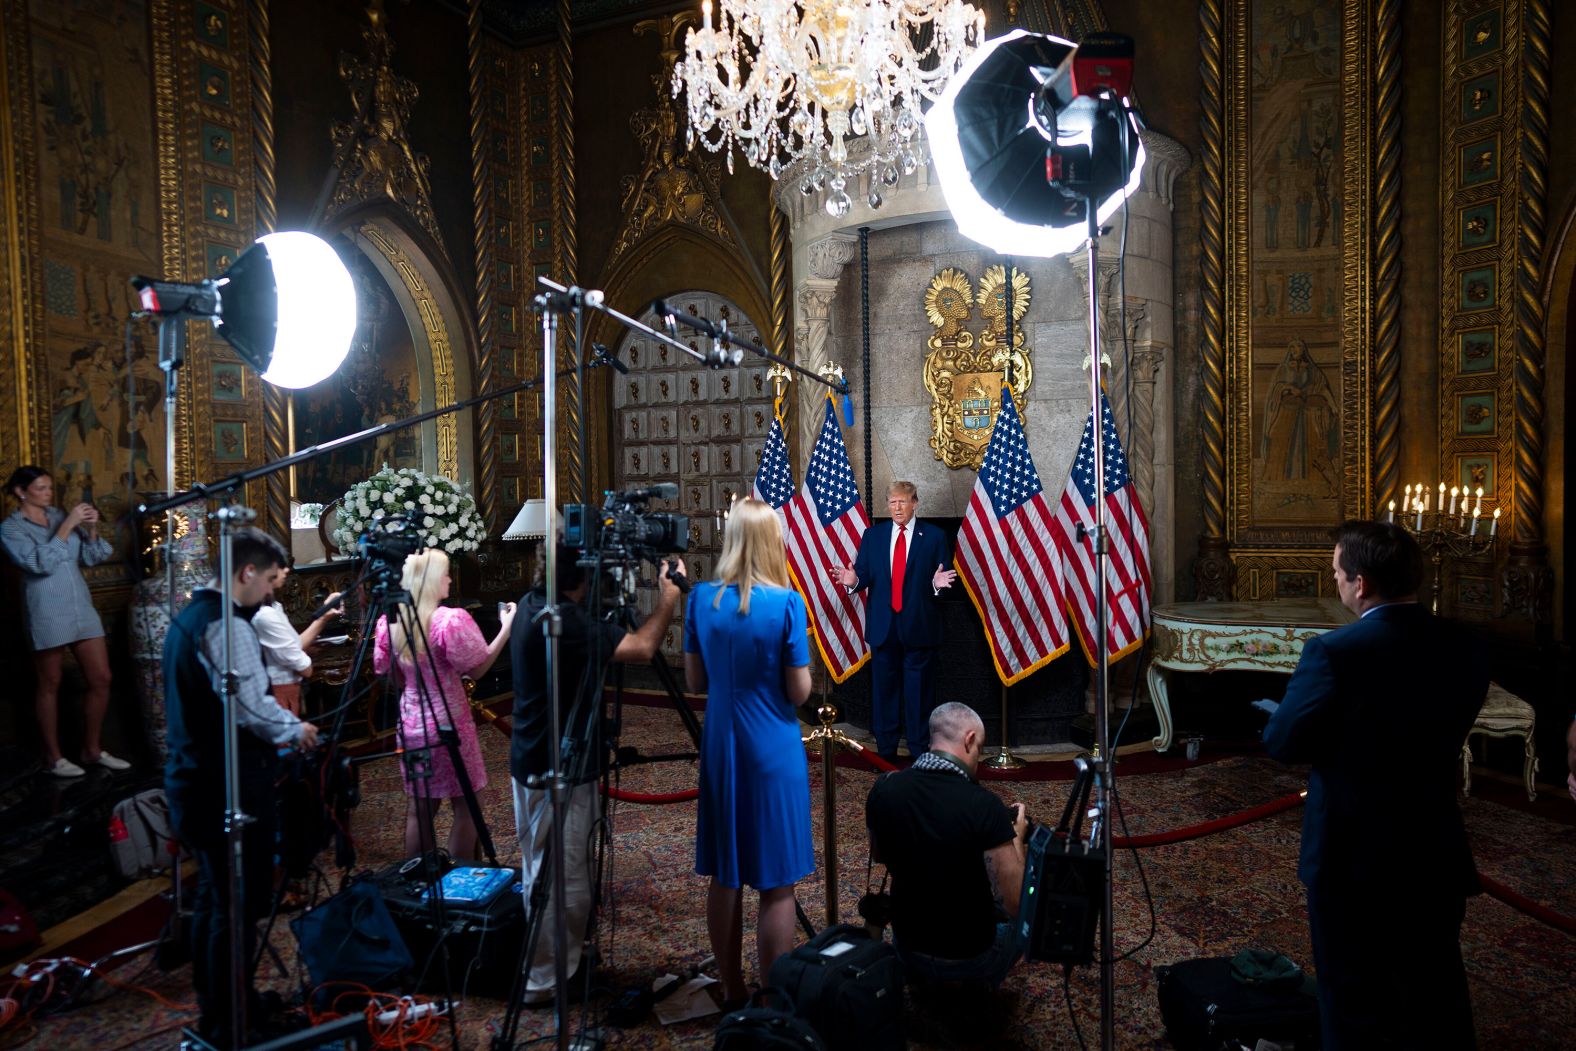 Former US President Donald Trump makes remarks from his Mar-a-Lago residence in Palm Beach, Florida, on Monday, March 4, after <a href="index.php?page=&url=https%3A%2F%2Fwww.cnn.com%2F2024%2F03%2F04%2Fpolitics%2Ftrump-supreme-court-colorado-14th-amendment%2Findex.html" target="_blank">the Supreme Court ruled</a> that Trump could not be removed from the ballot in Colorado or any other state. The court's decision followed months of debate over whether Trump violated the "insurrectionist clause" included in the 14th Amendment. <a href="index.php?page=&url=https%3A%2F%2Fwww.cnn.com%2Fpolitics%2Flive-news%2Fsupreme-court-opinion-trump-ballot-03-04-24%2Fh_7dbc795be035ace0052f8aef6da54282" target="_blank">Trump lauded the decision</a> as an "important decision" that was "very well-crafted."